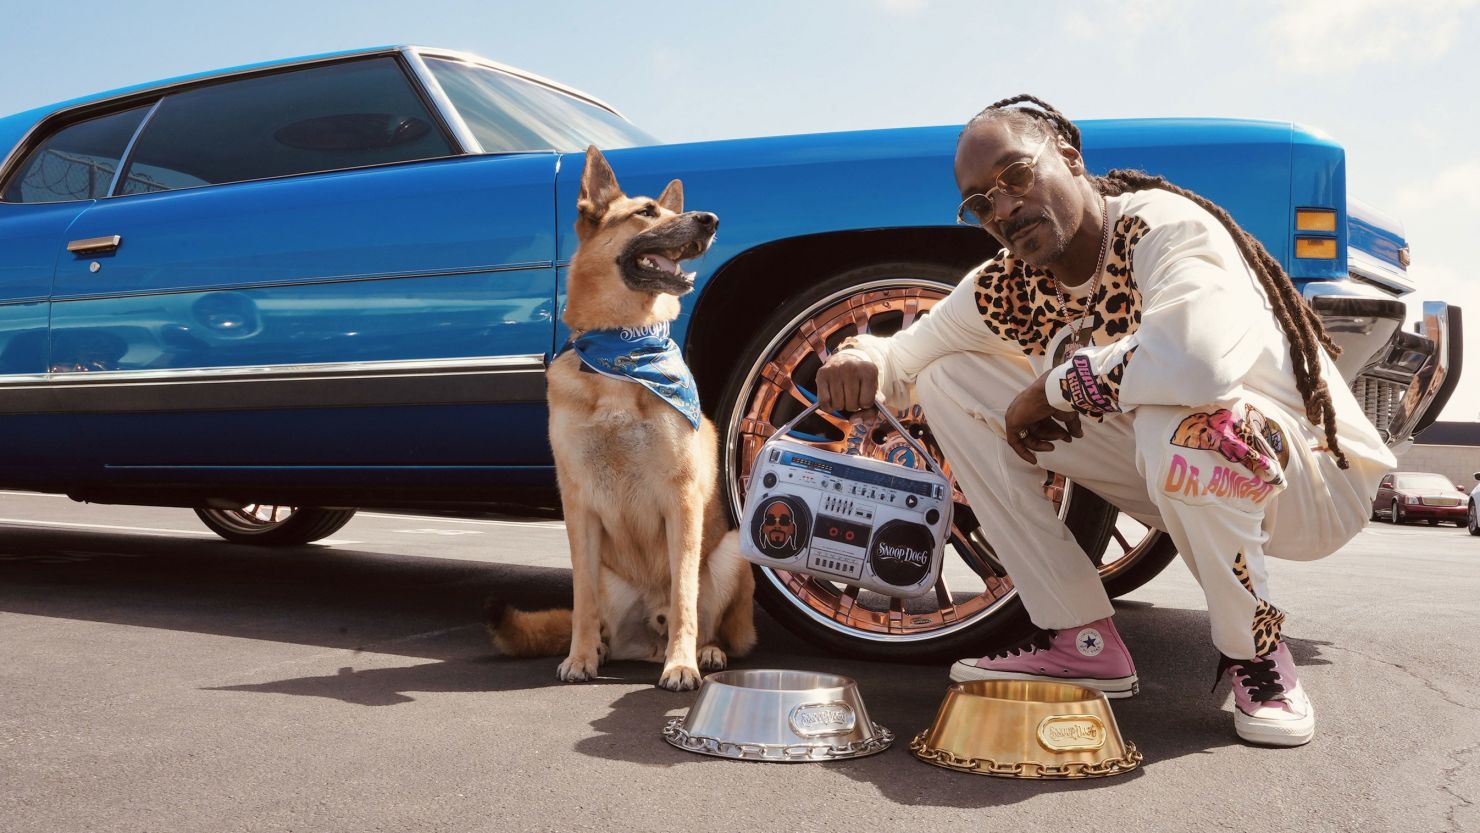 Snoop Dogg has launched a line of pet accessories called "Snoop Doggie Doggs."